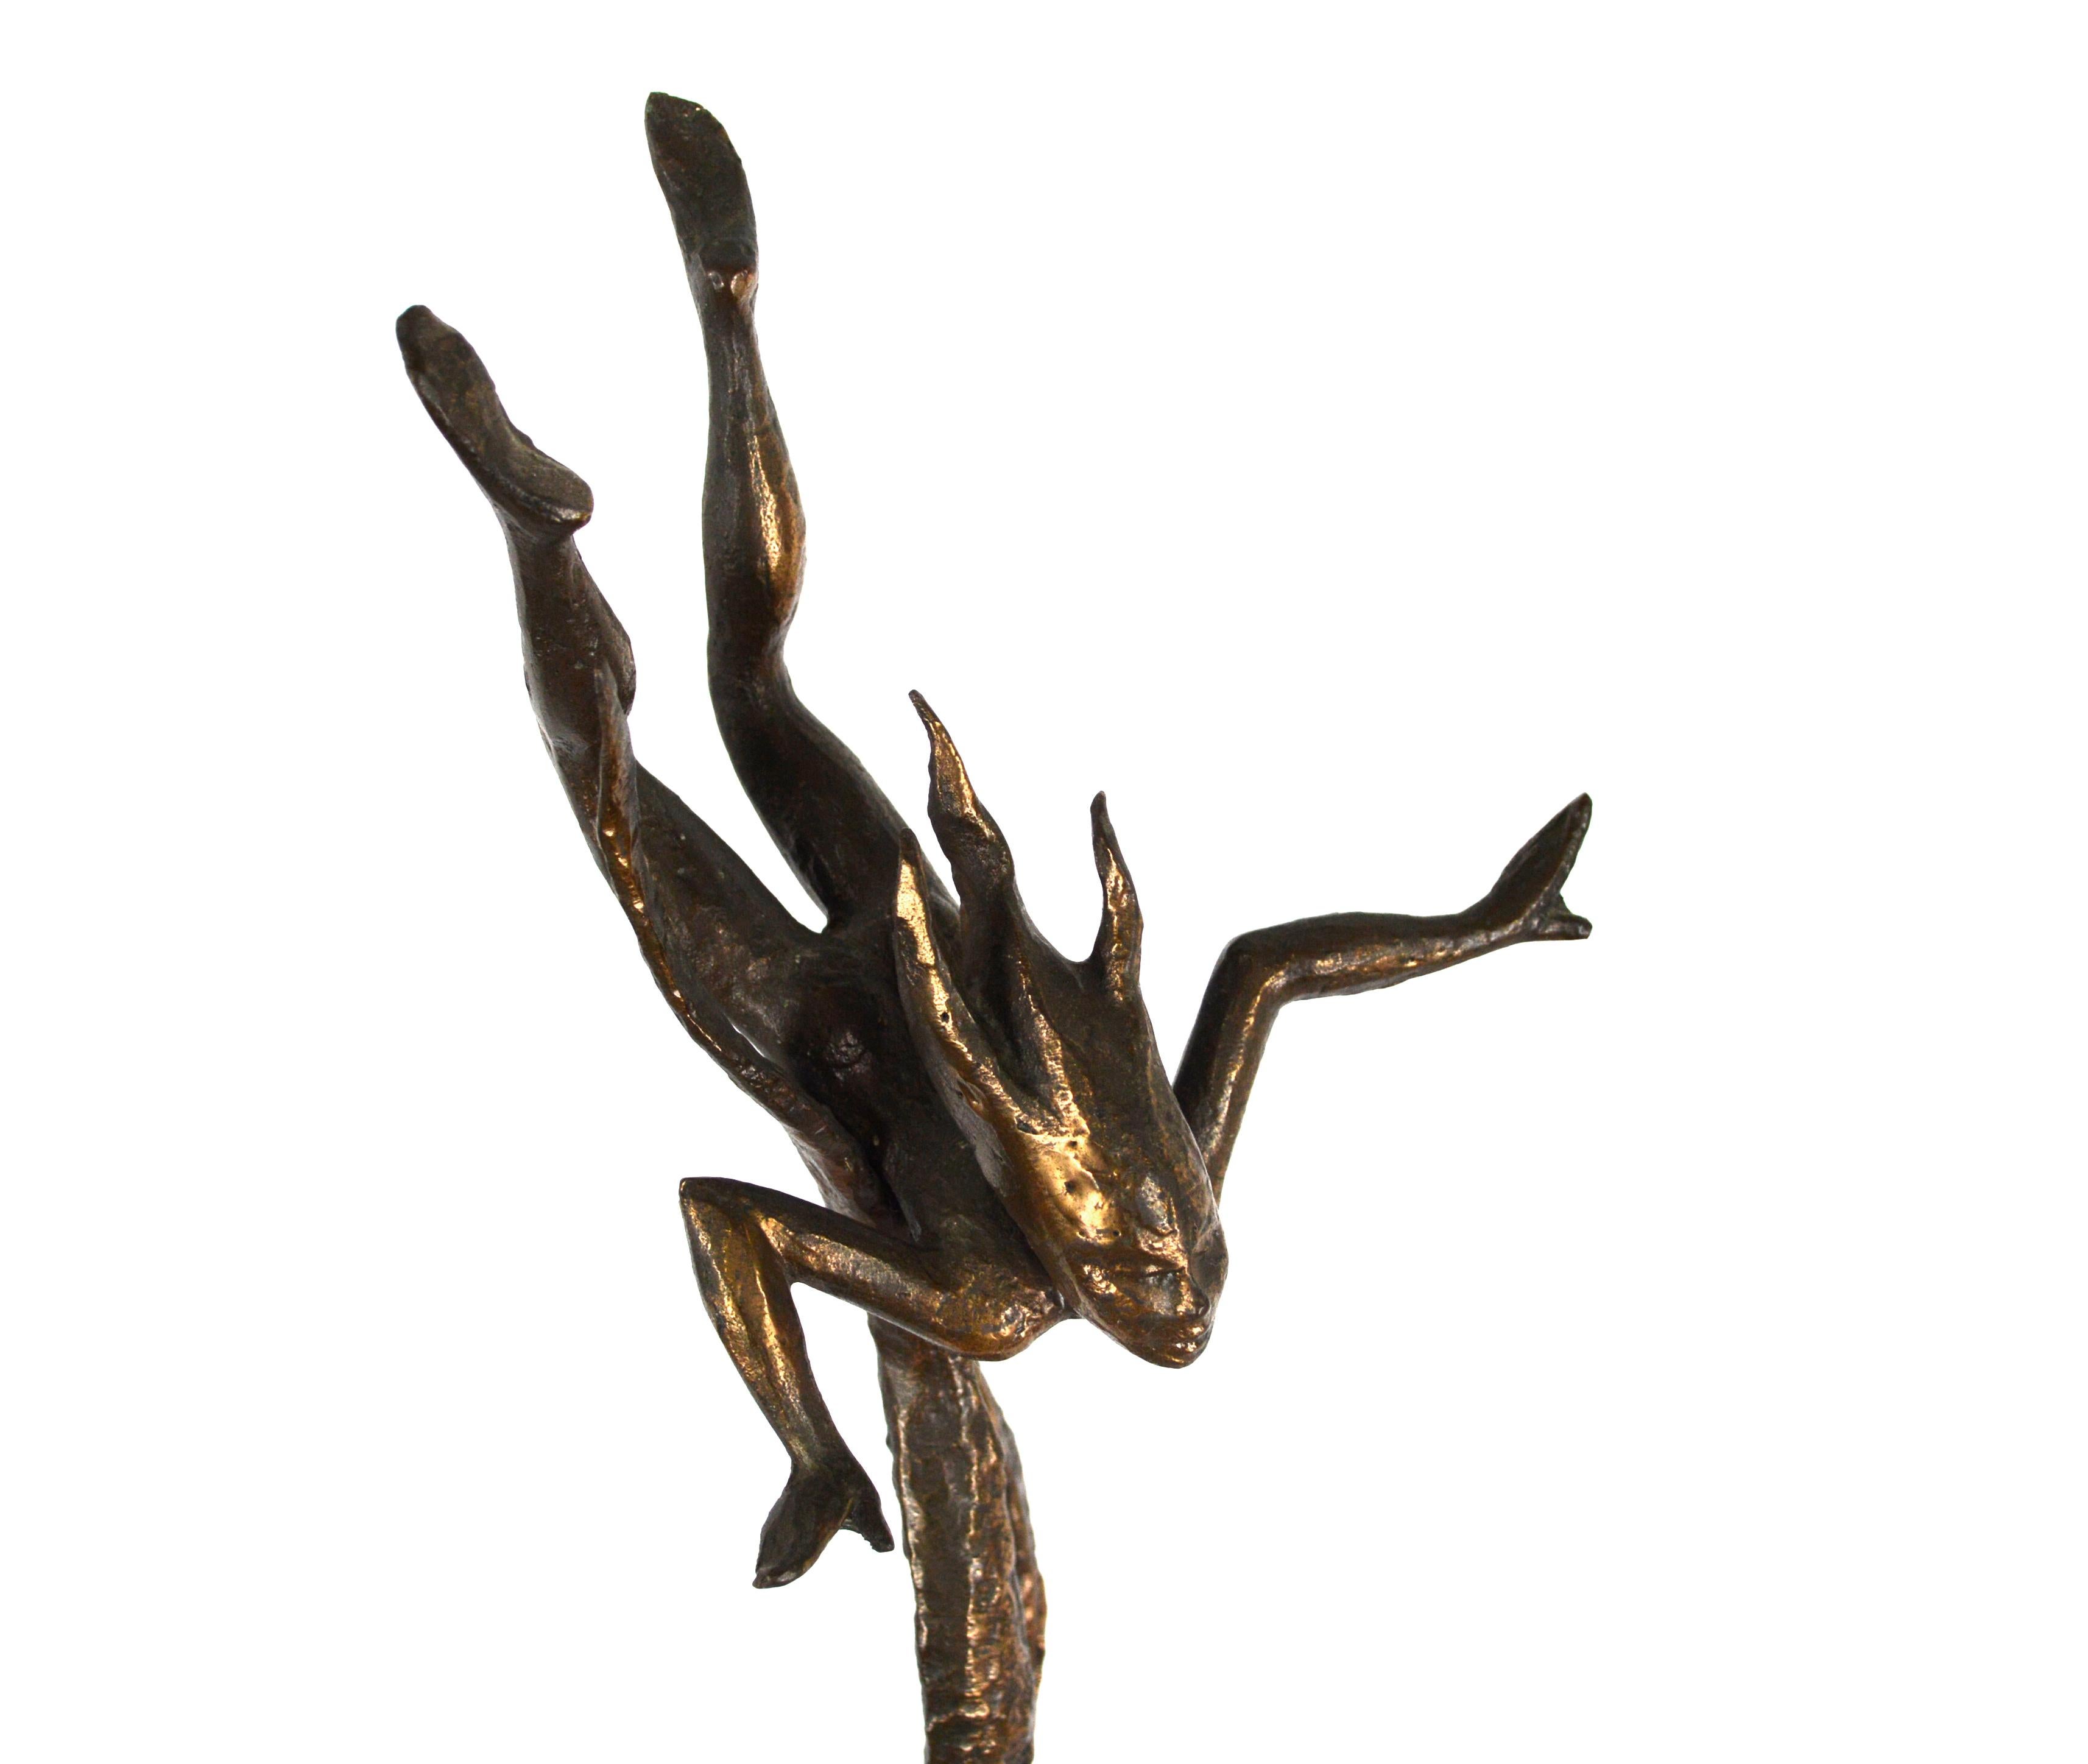 Beautiful mid century modern figurative bronze sculpture by an unknown artist named Bouchard. A sea nymph is depicted as a nude figure in a dynamic diving pose, with an elongated flowing plant-like form. Bronze sculpture is attached to a rectangular